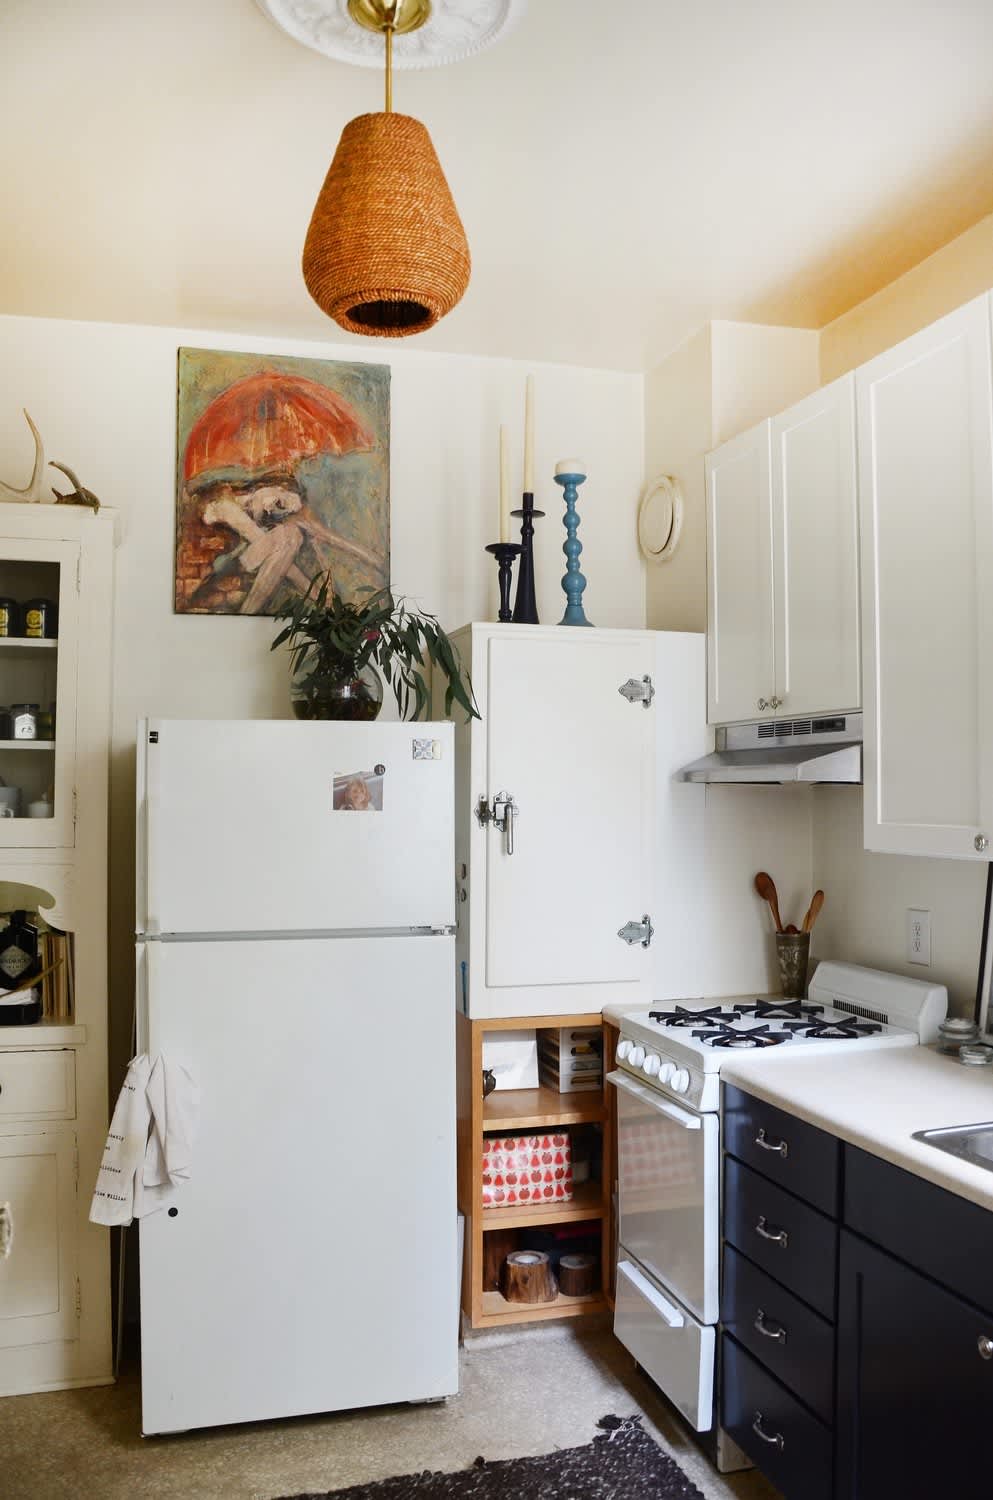 What To Do If You Don't Have a Range Hood or Vent